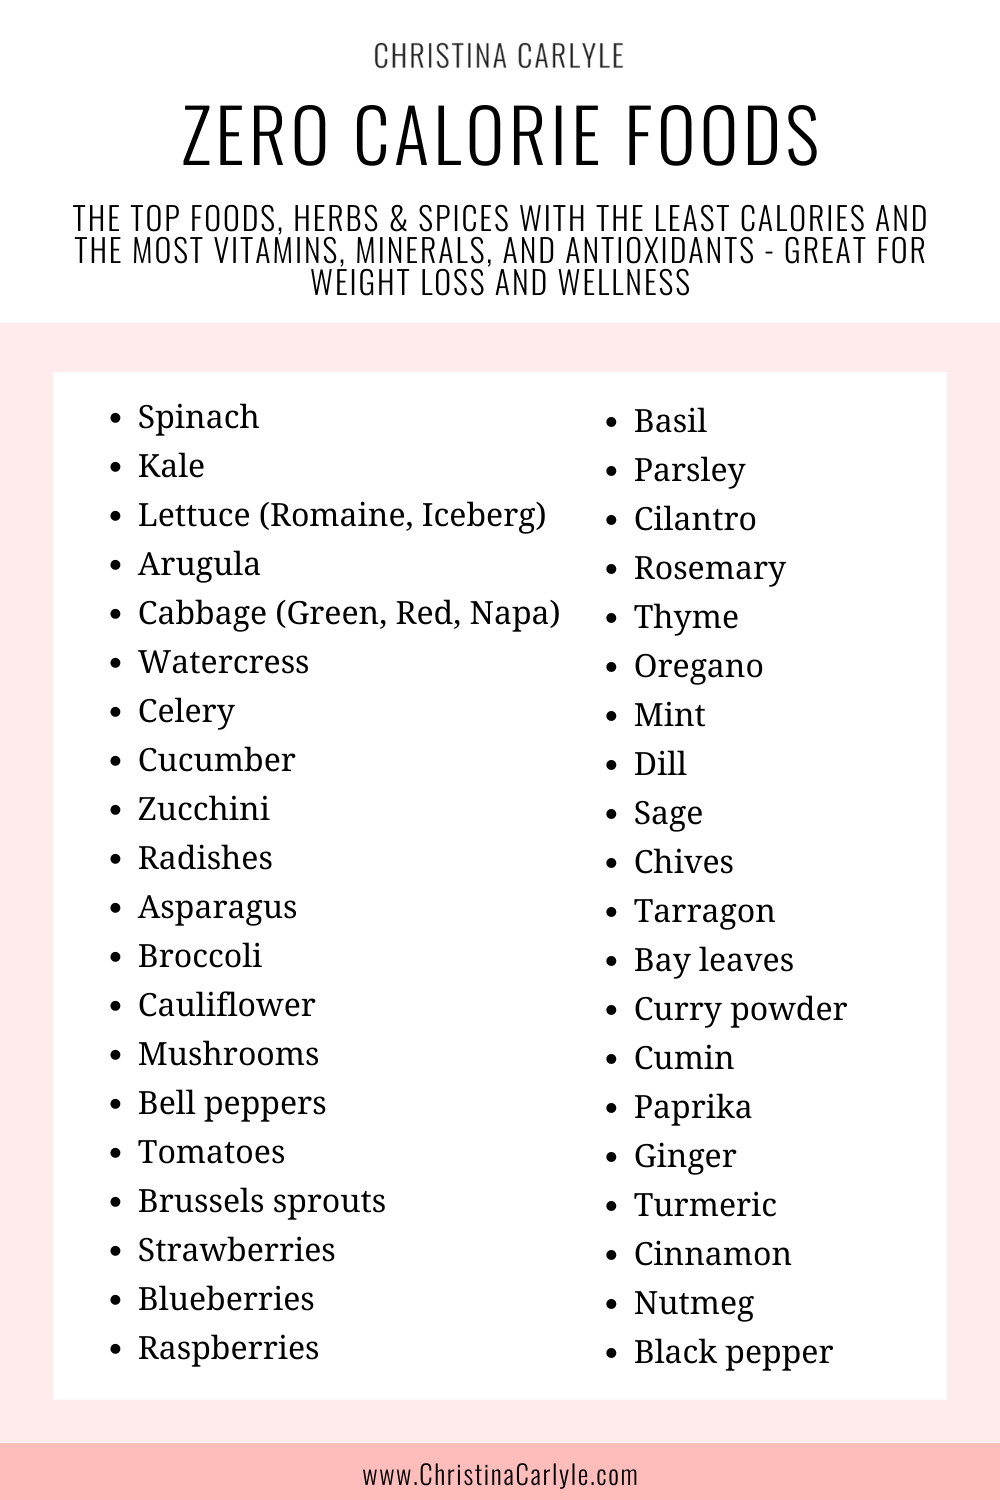 a list of 40 zero calorie foods, herbs, and spices